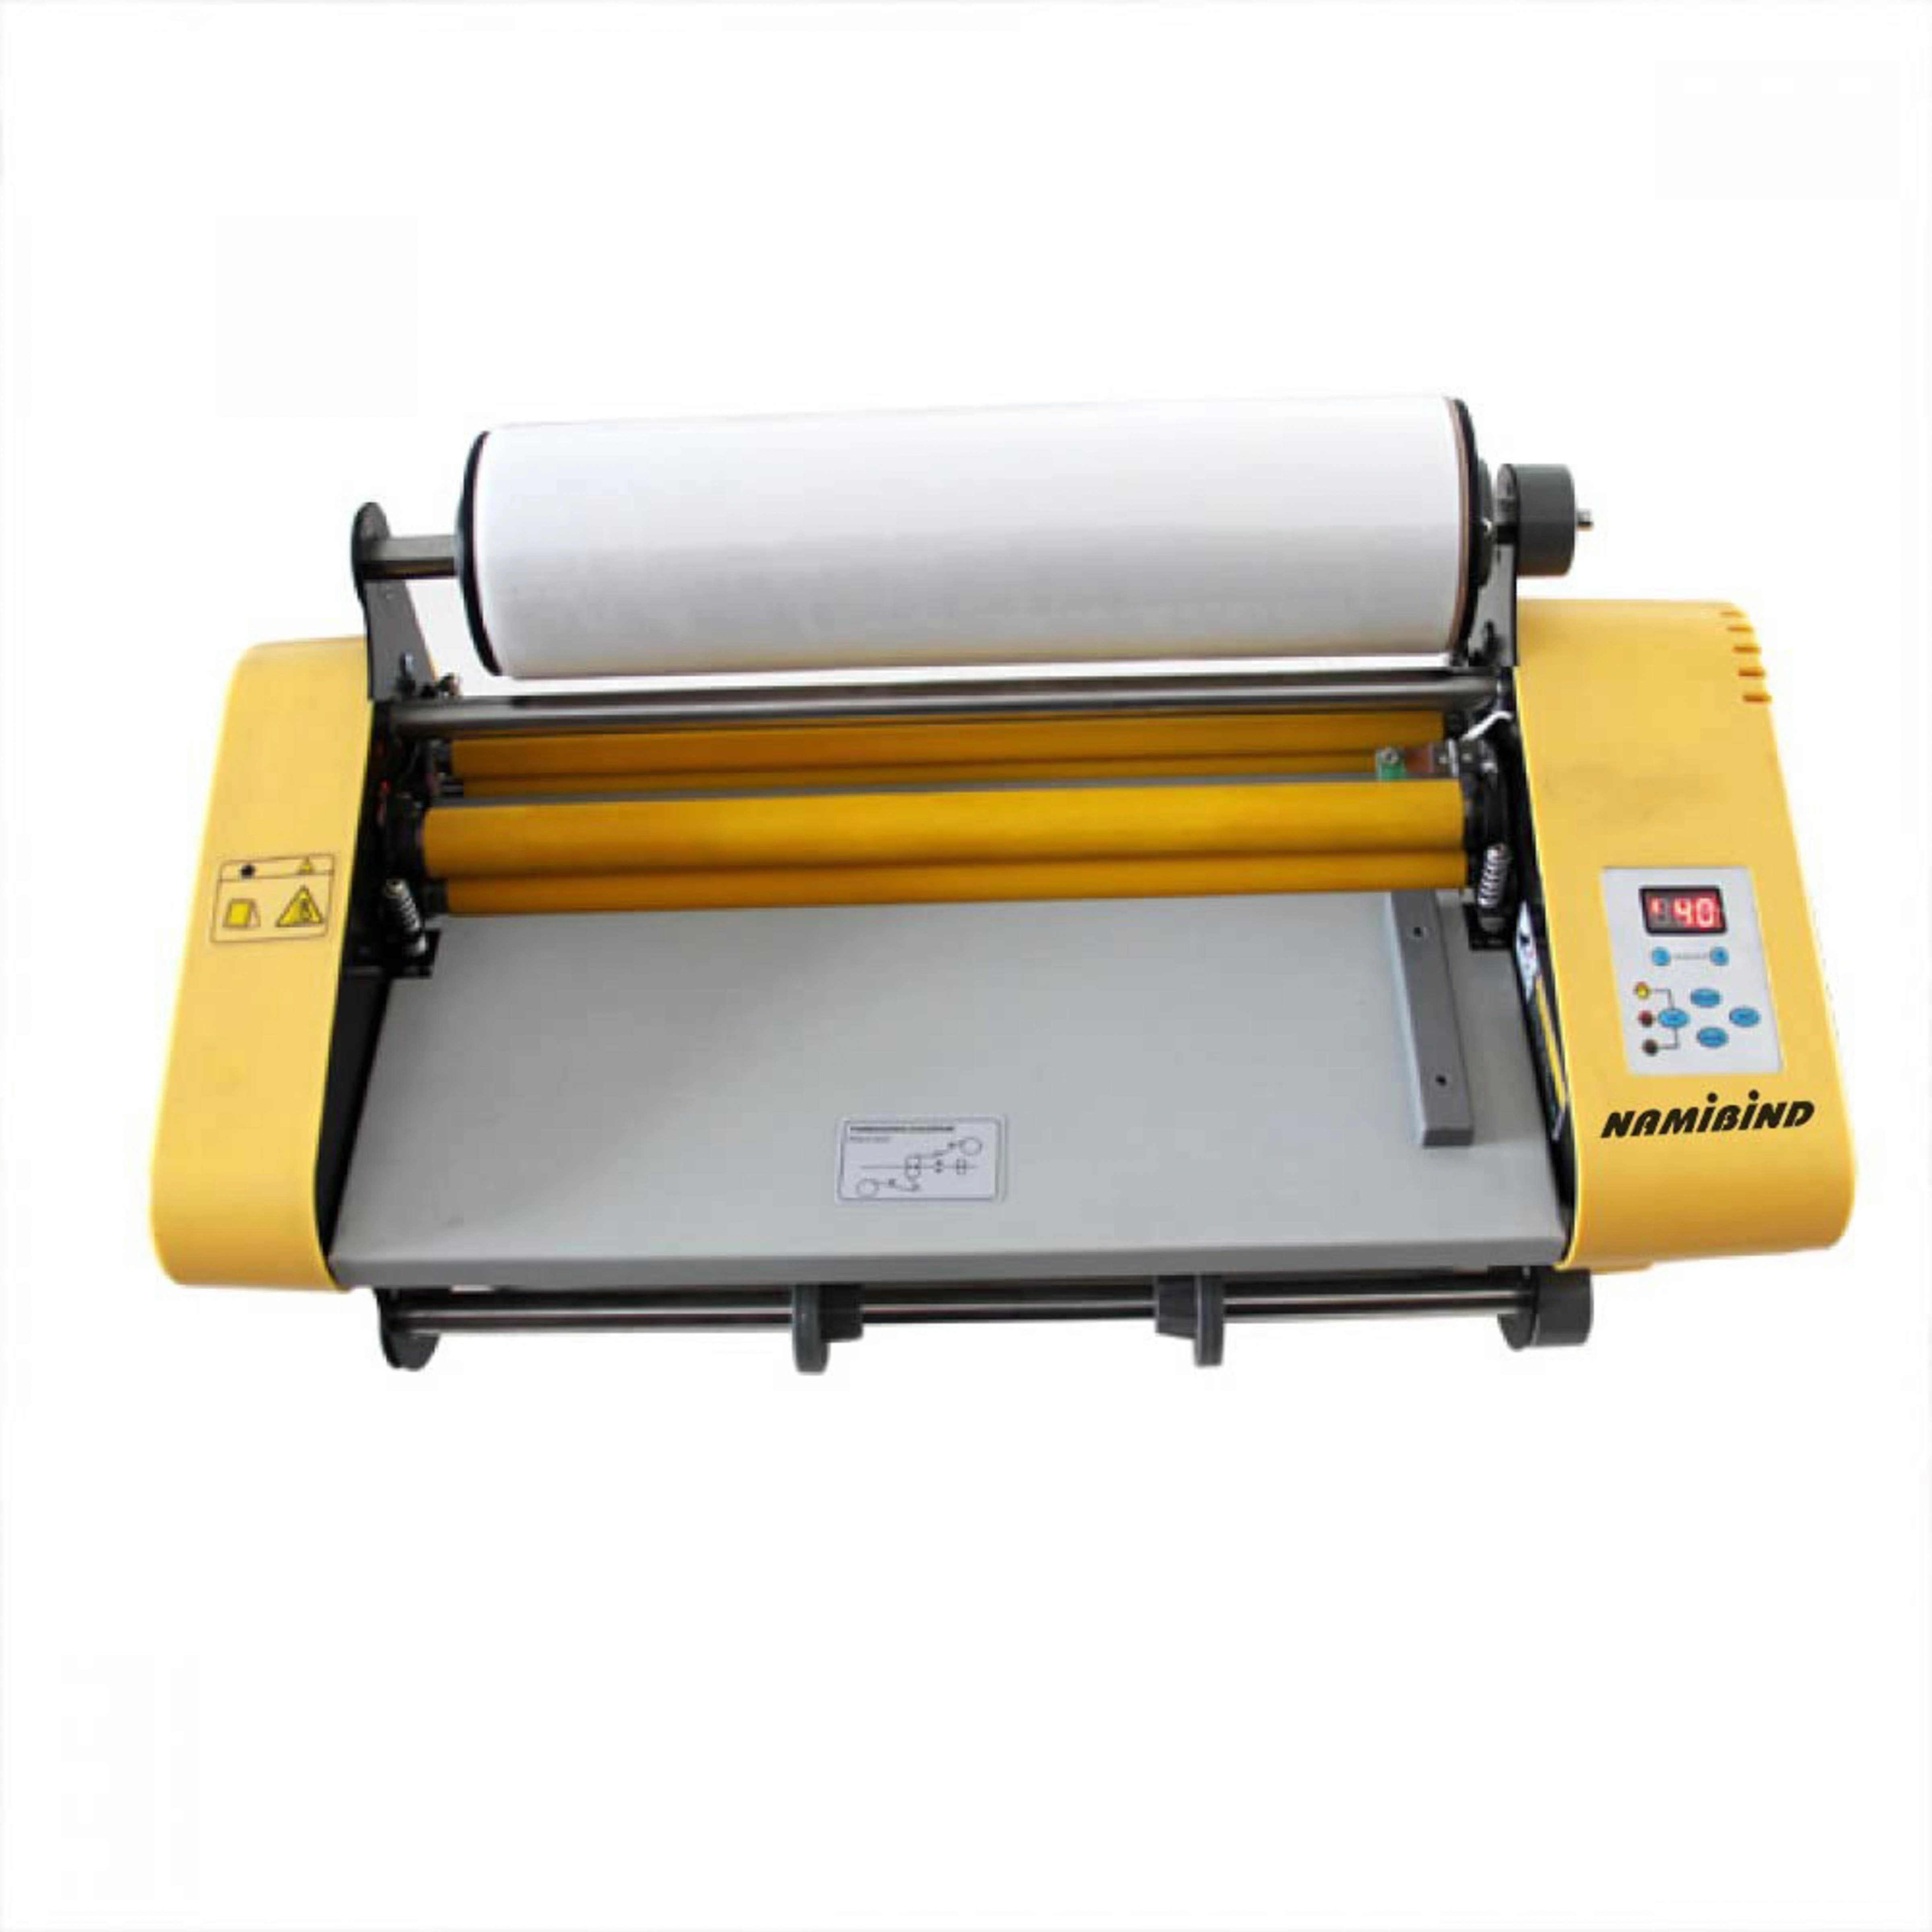 Document and Photo Laminating Machine Use for Office 9-inch A4 Laminator Machine with Manual Film Removal Function Thermal Laminator Home and School Meihengtong Thermal Laminator 